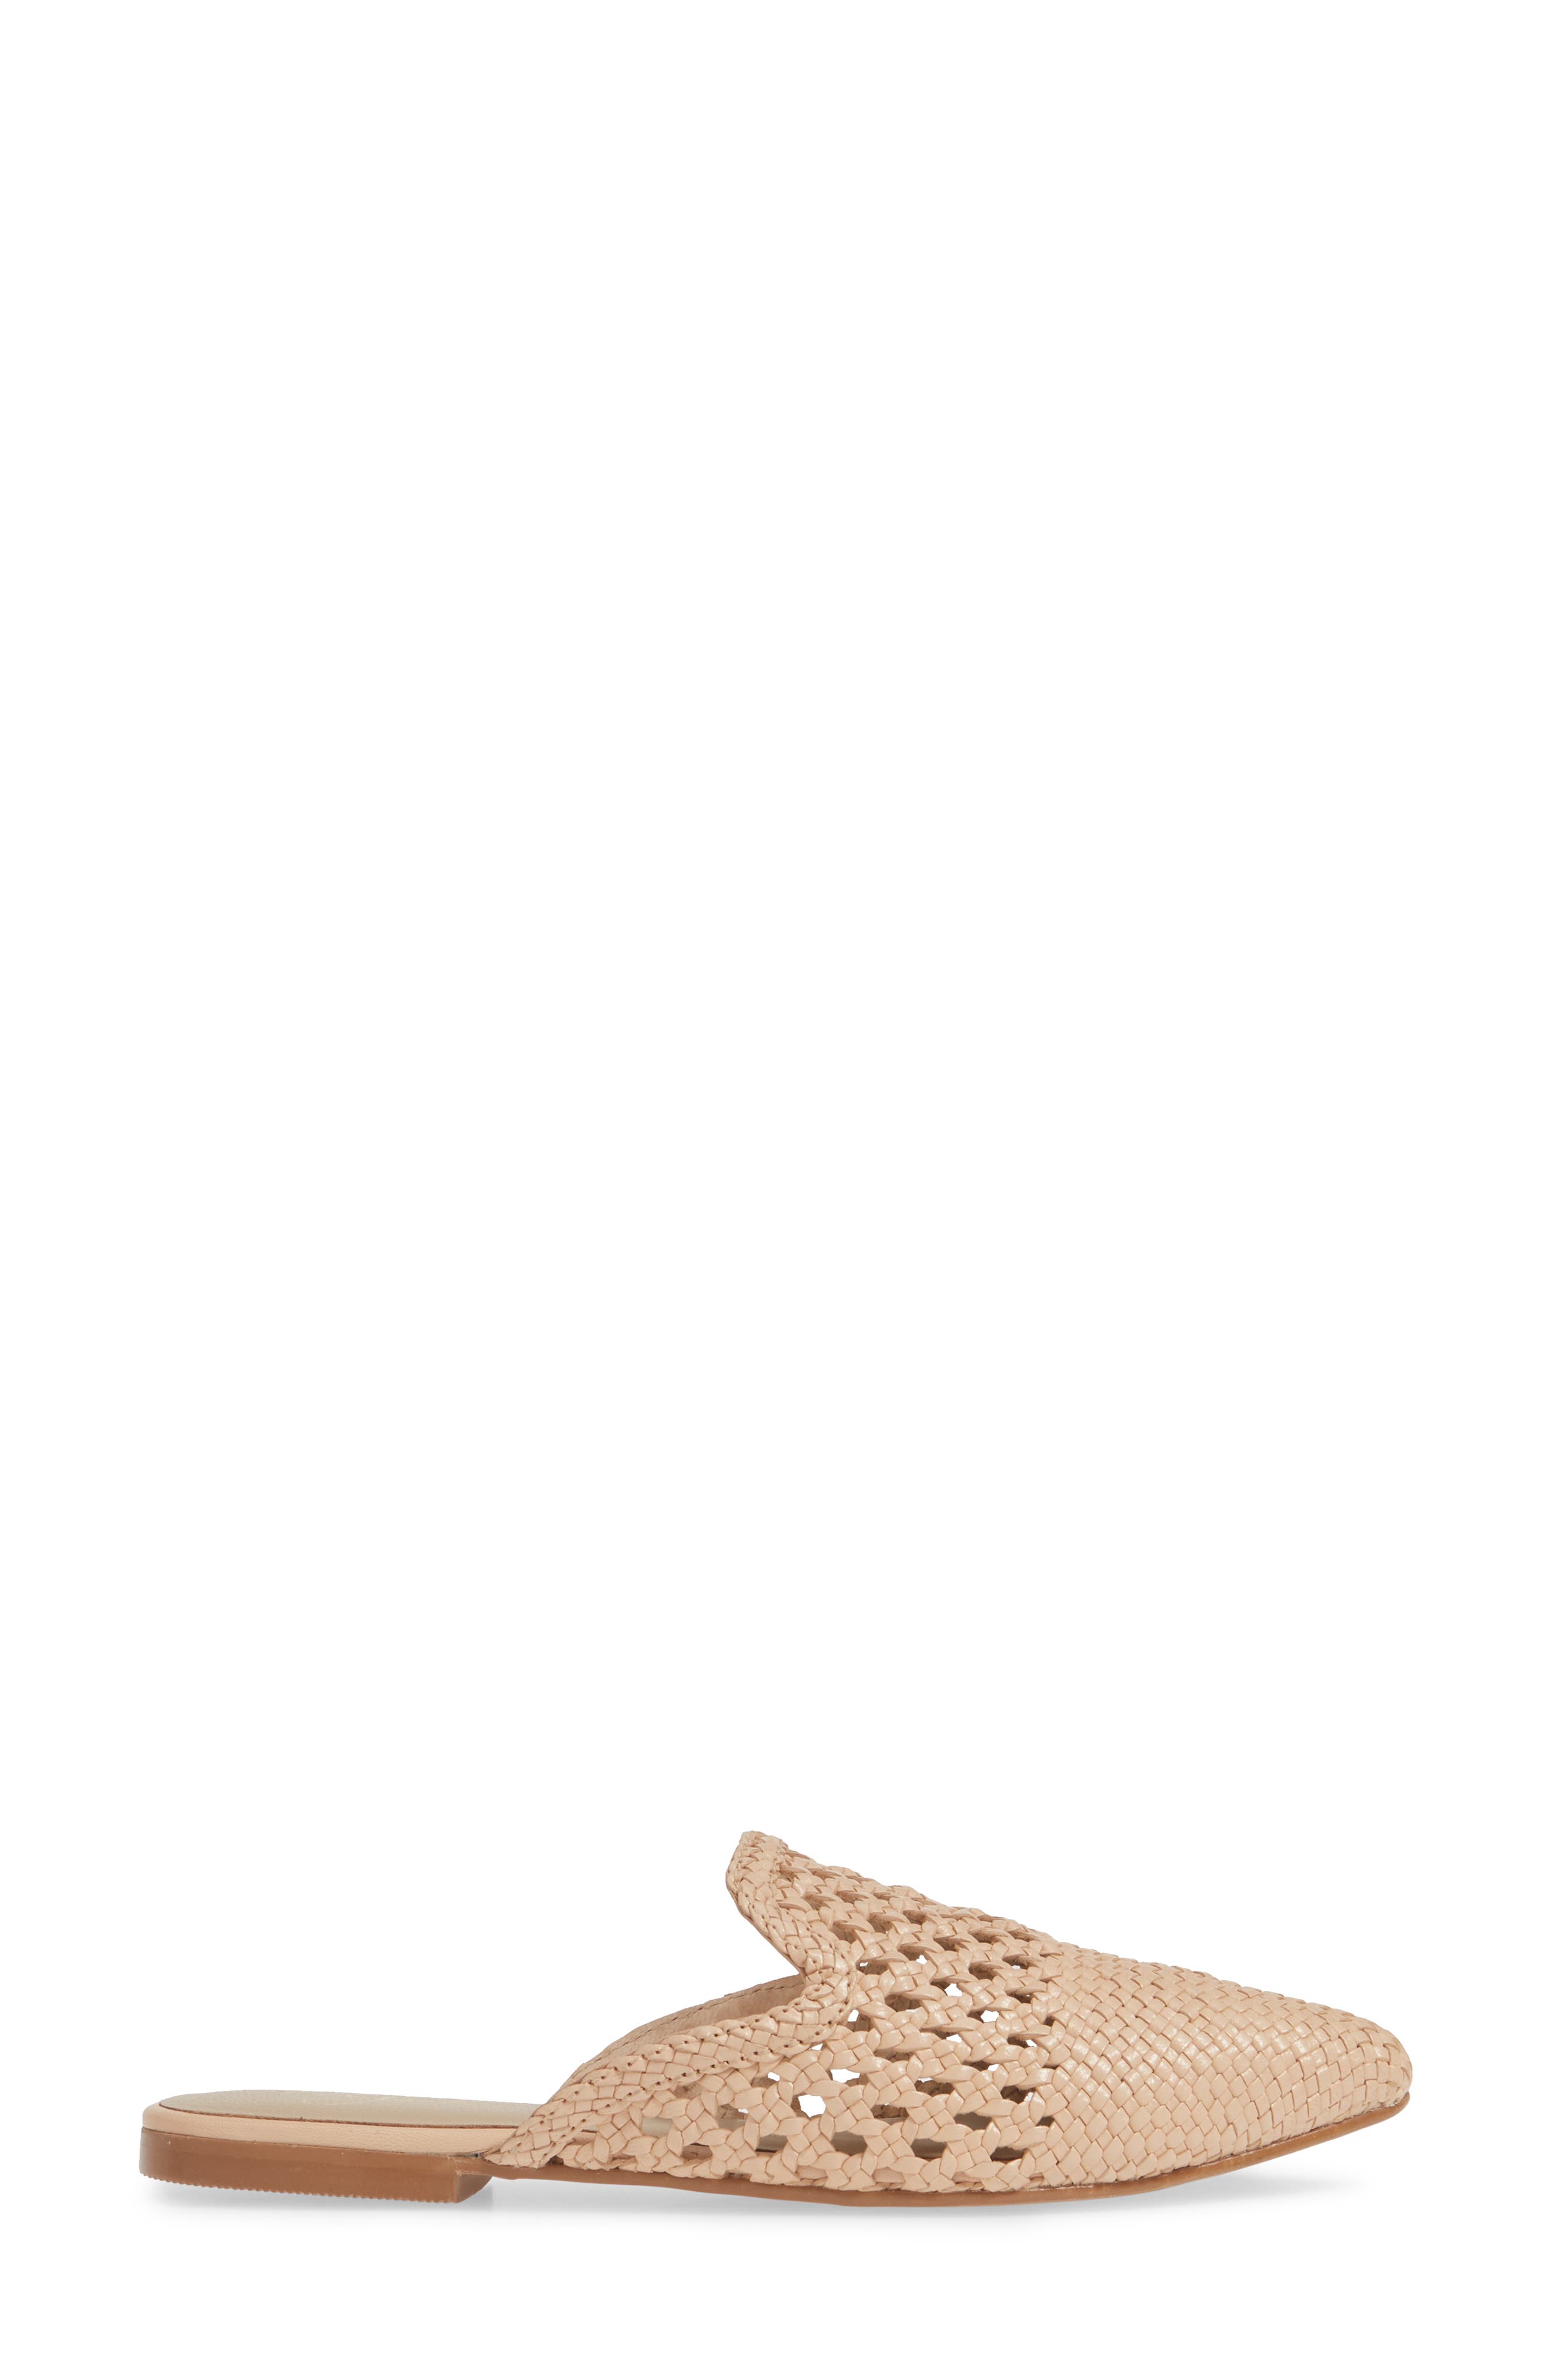 42 GOLD | Corra Woven Loafer Mule 